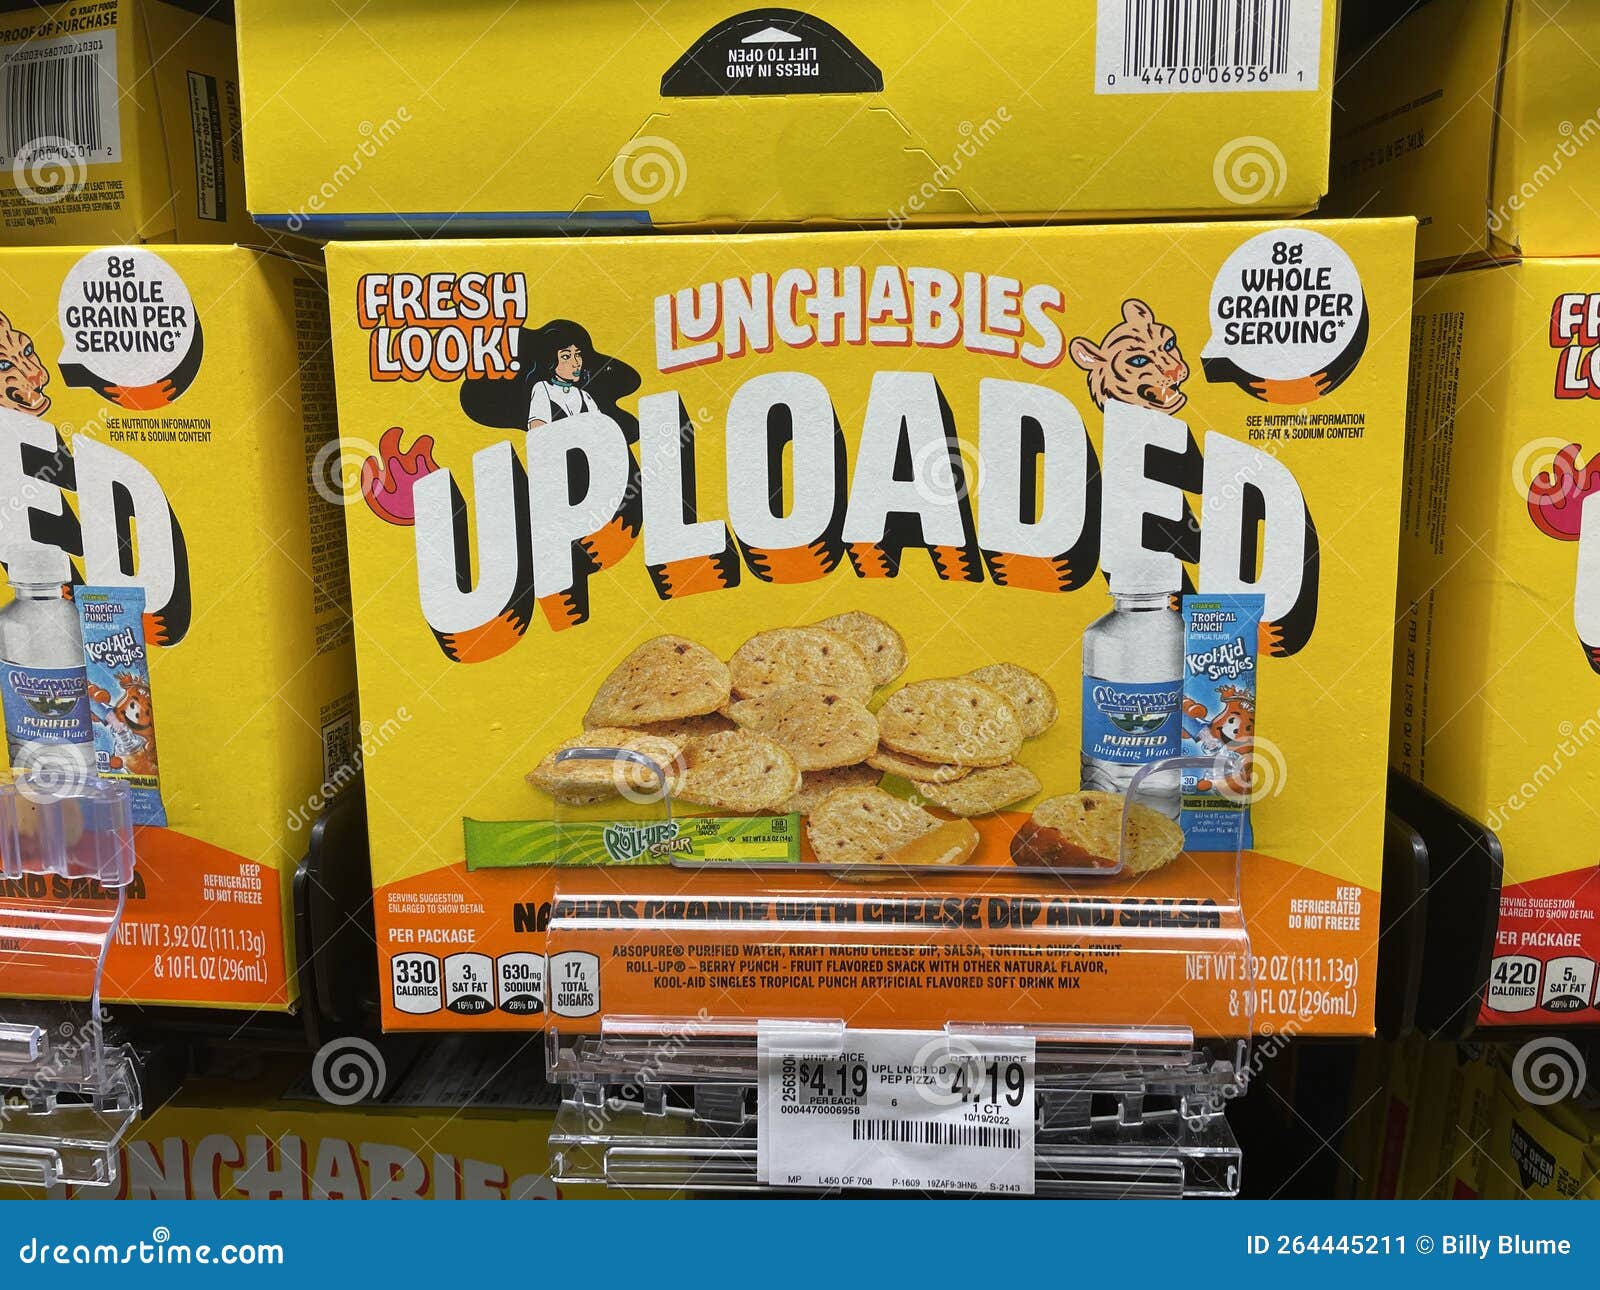 Grocery Store Lunchables Dinners Uploaded Editorial Photo Image of